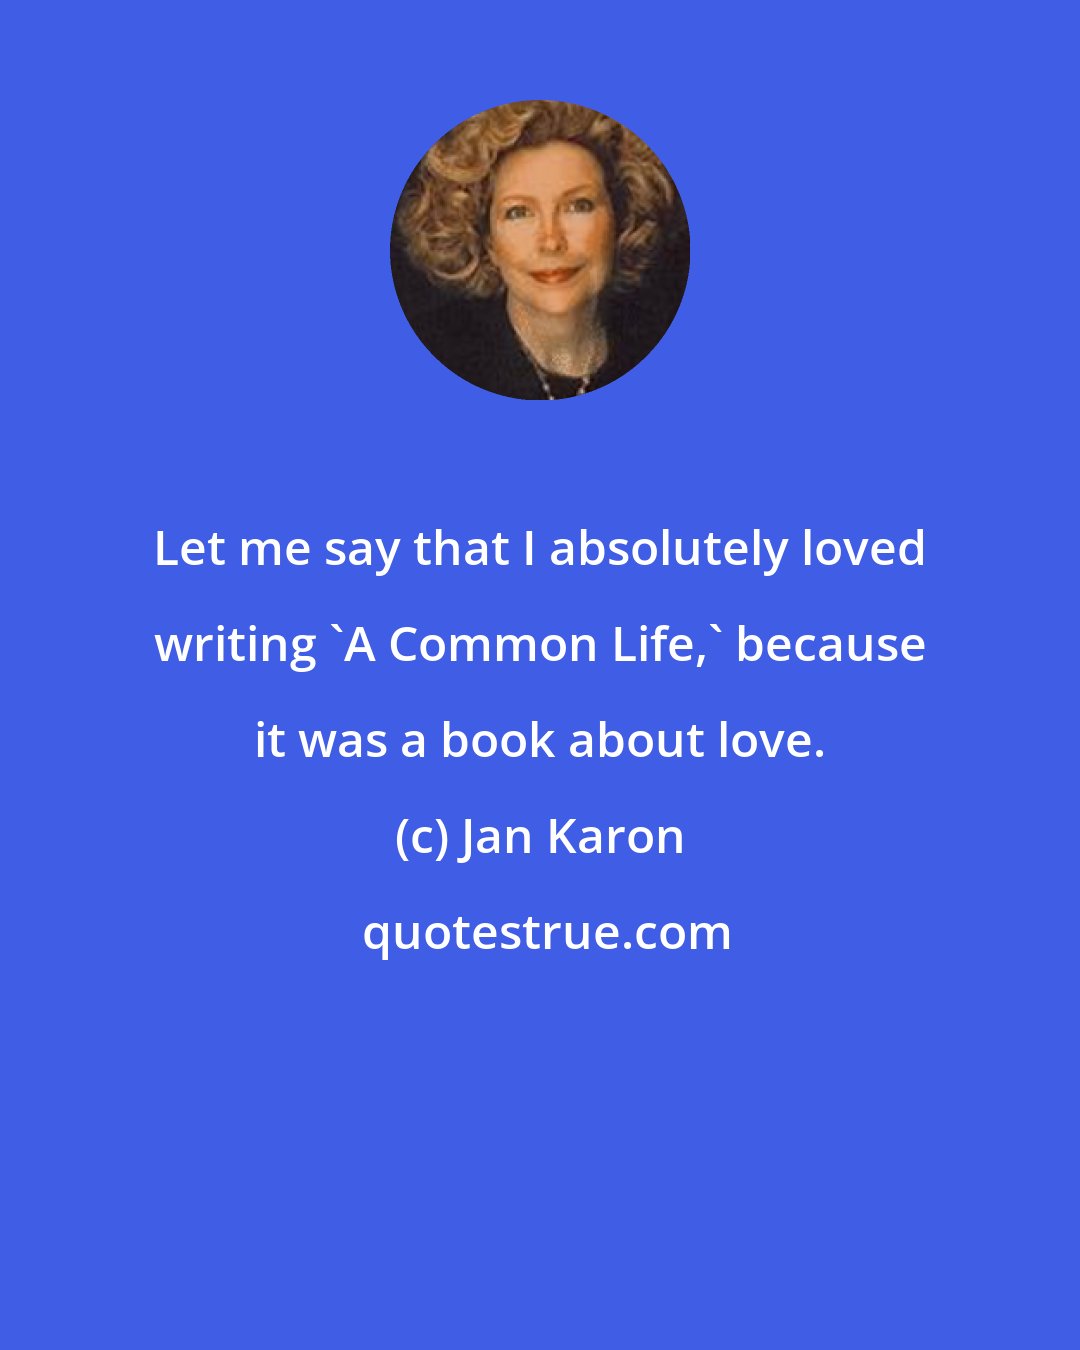 Jan Karon: Let me say that I absolutely loved writing 'A Common Life,' because it was a book about love.